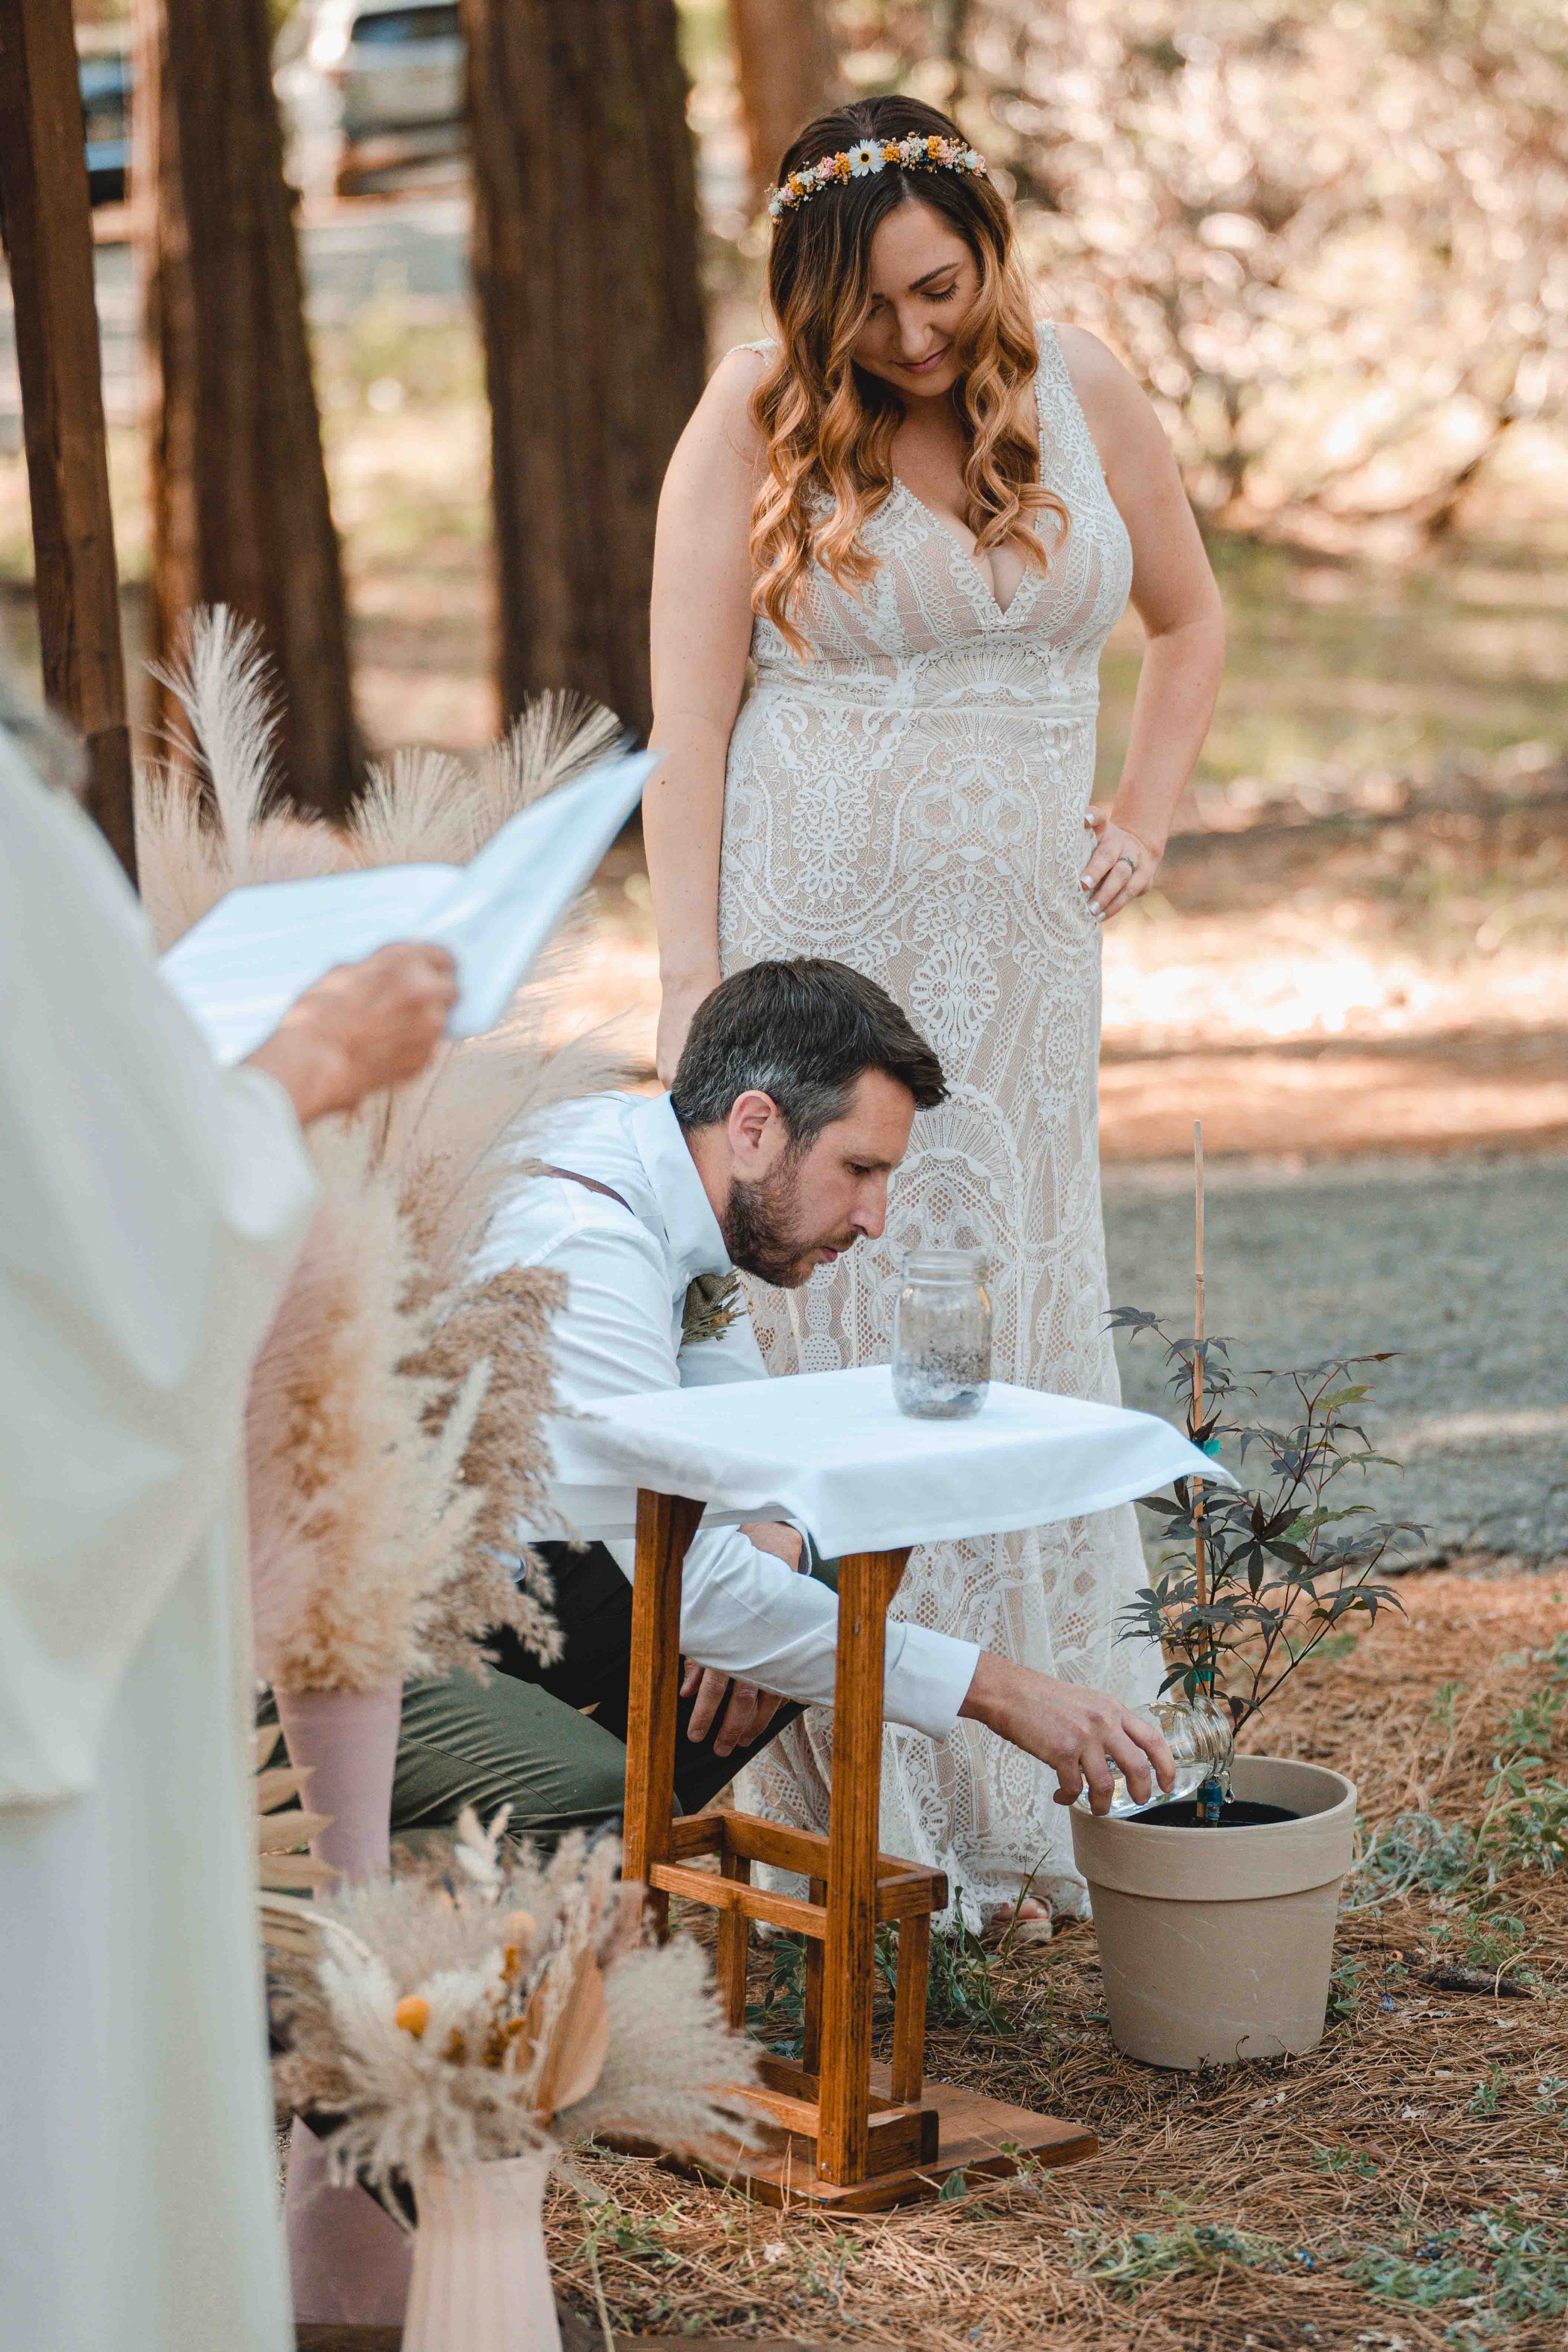 Bride and groom planting a tree during the ceremony